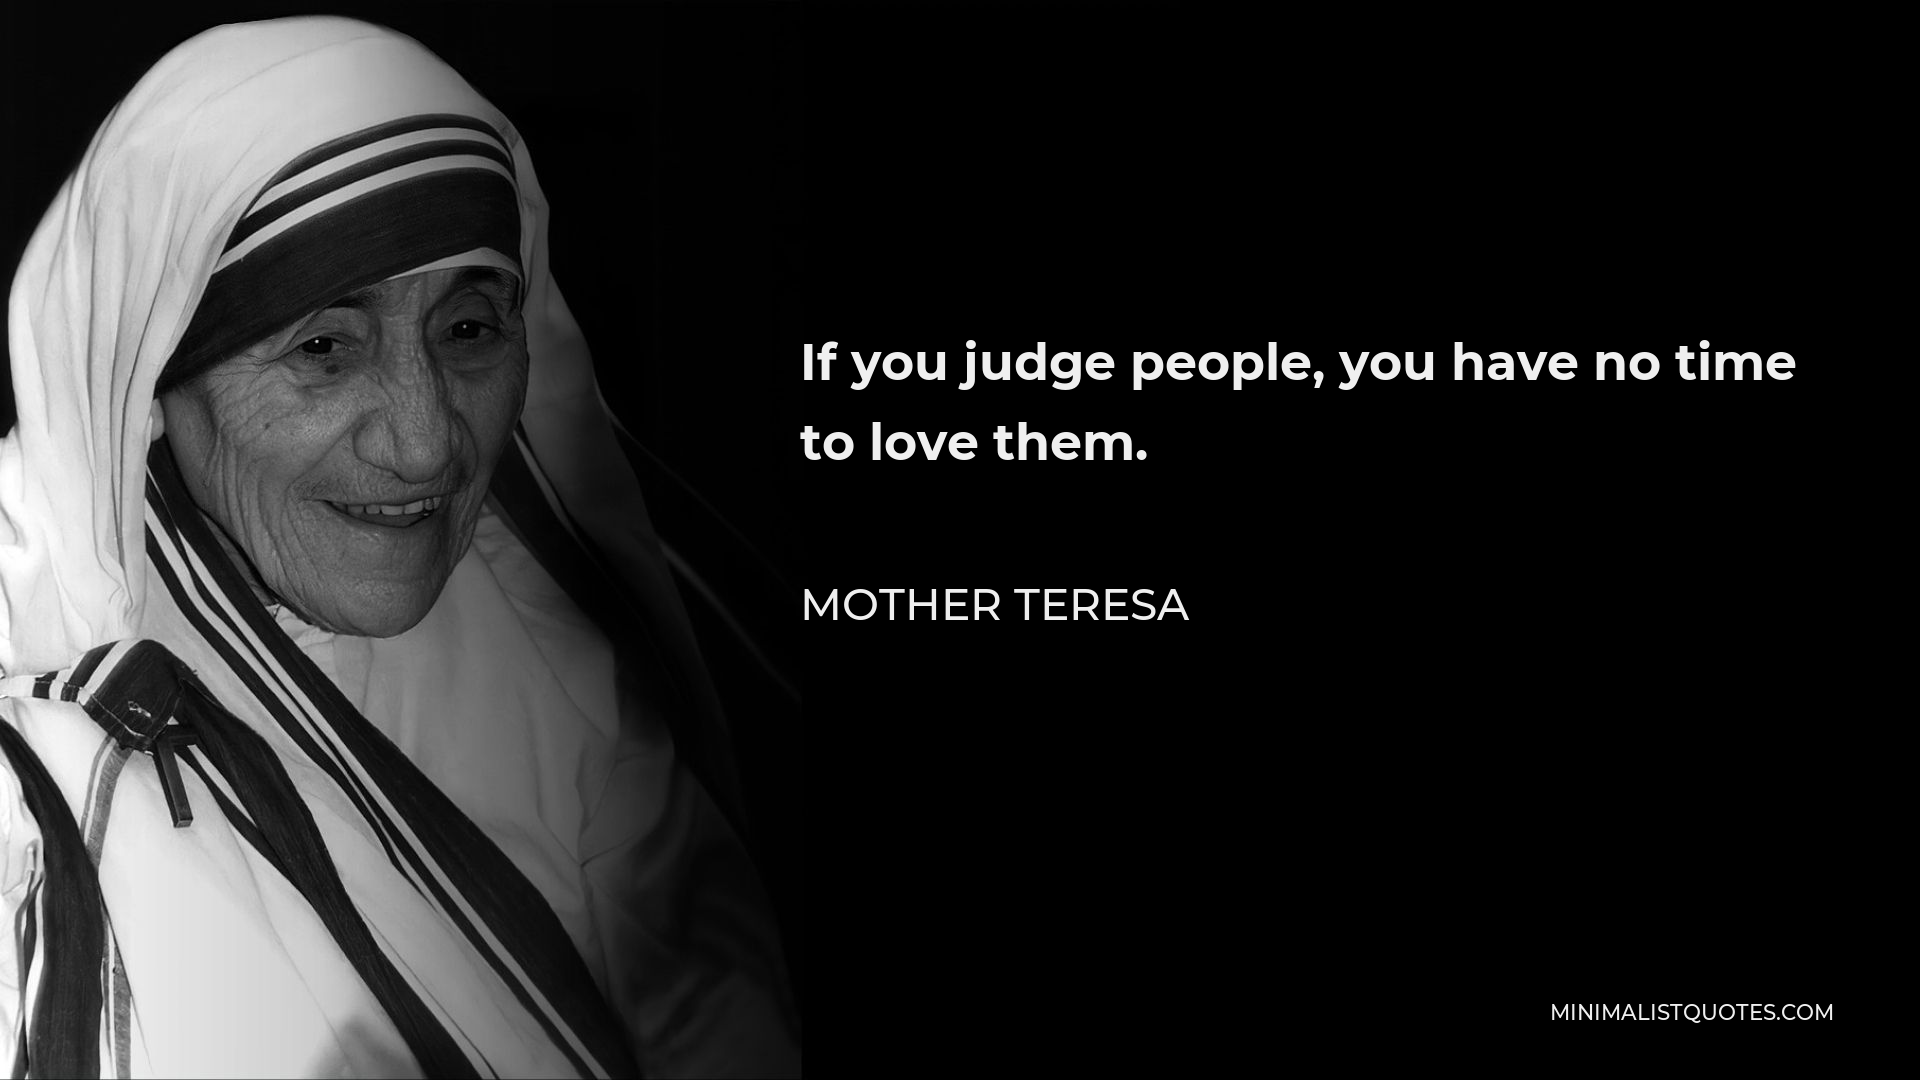 Mother Teresa Quote - If you judge people, you have no time to love them.